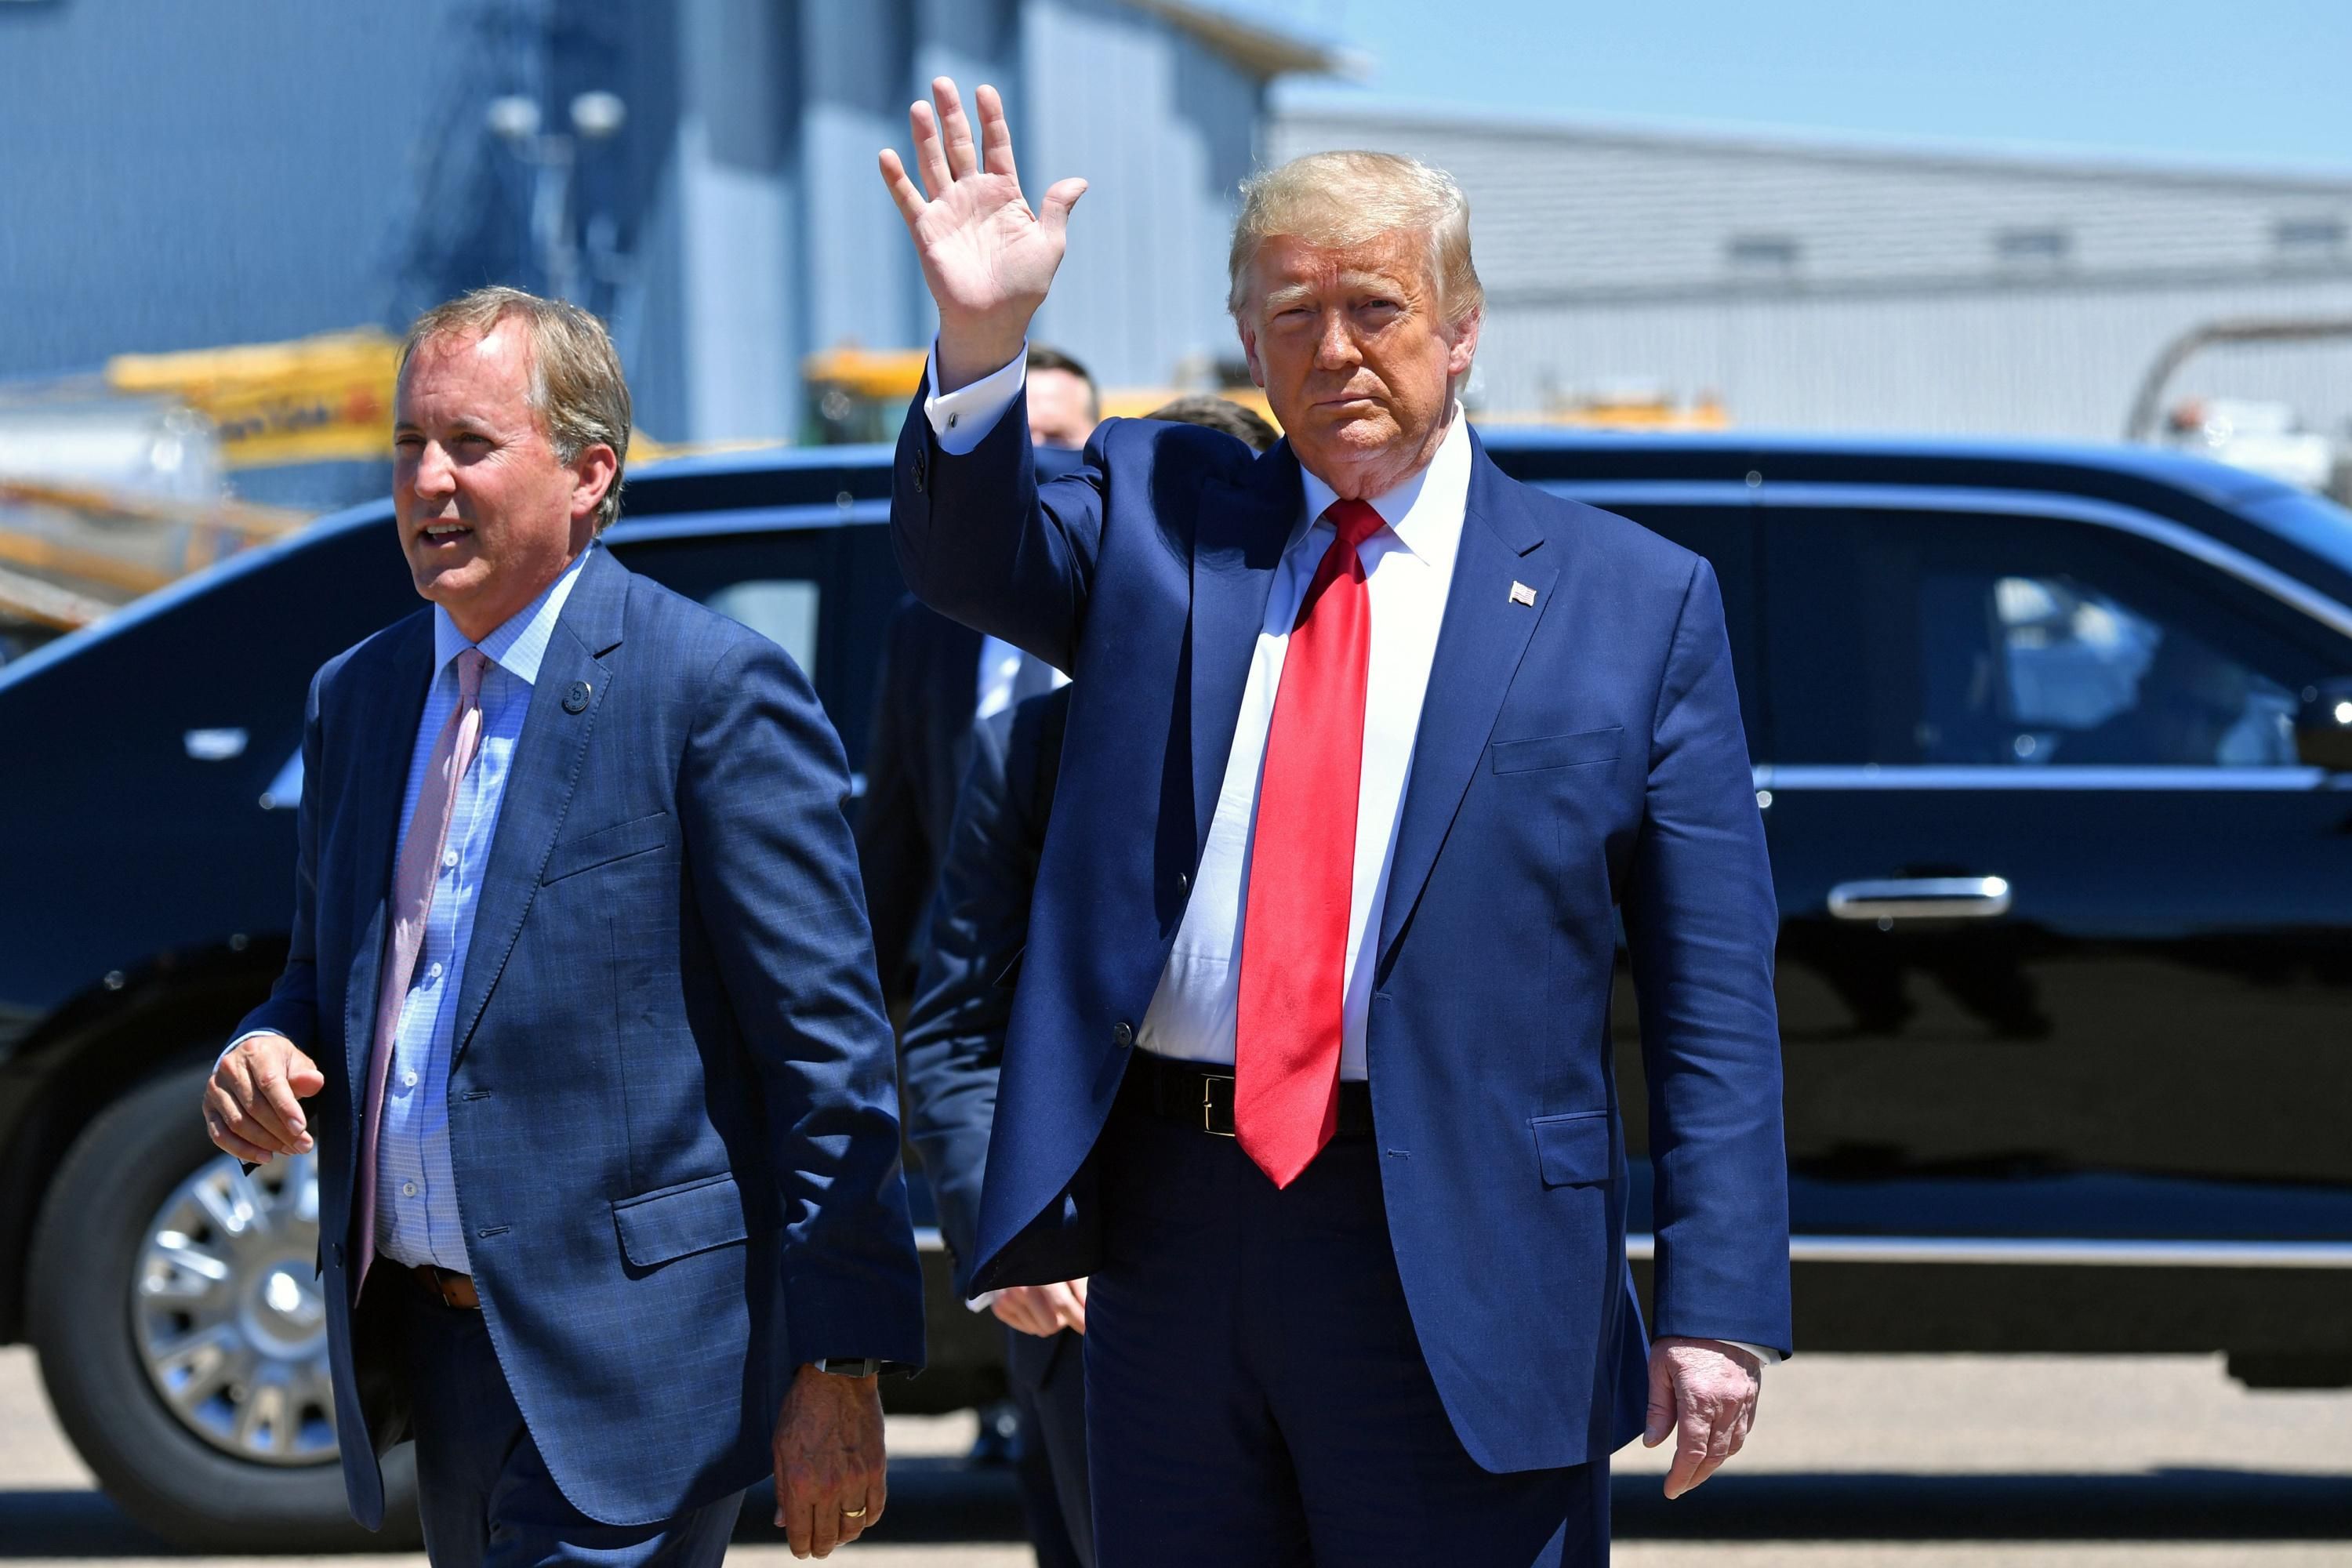 Then-President Donald Trump attends an event with Texas Attorney General Ken Paxton